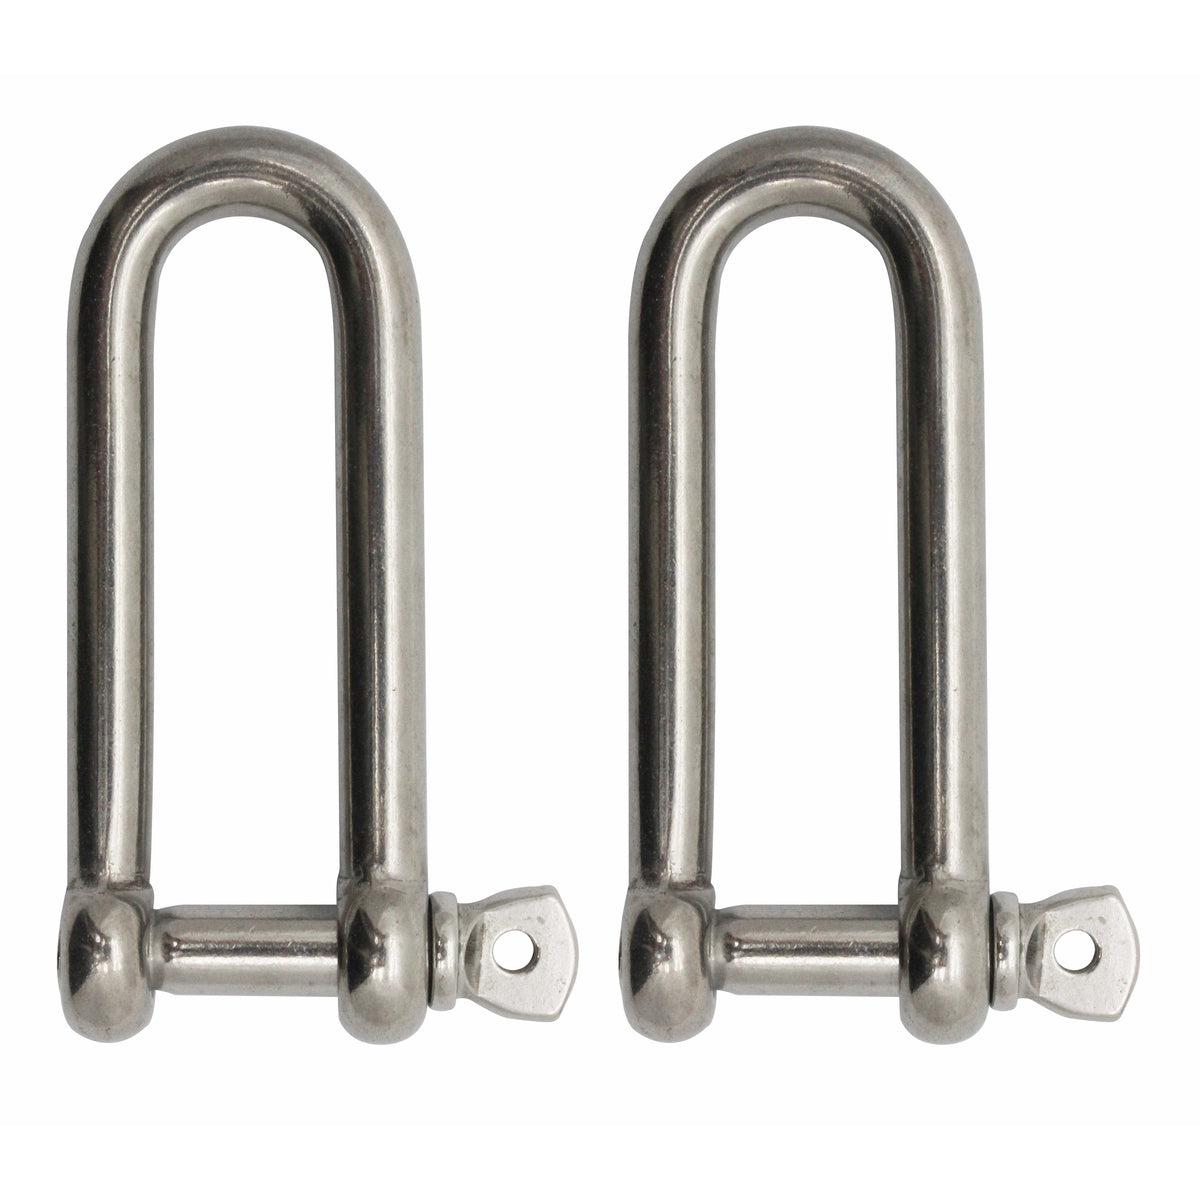 Extreme Max BoatTector SS Long D Shackle 1/4" 2-pk #3006.8201.2